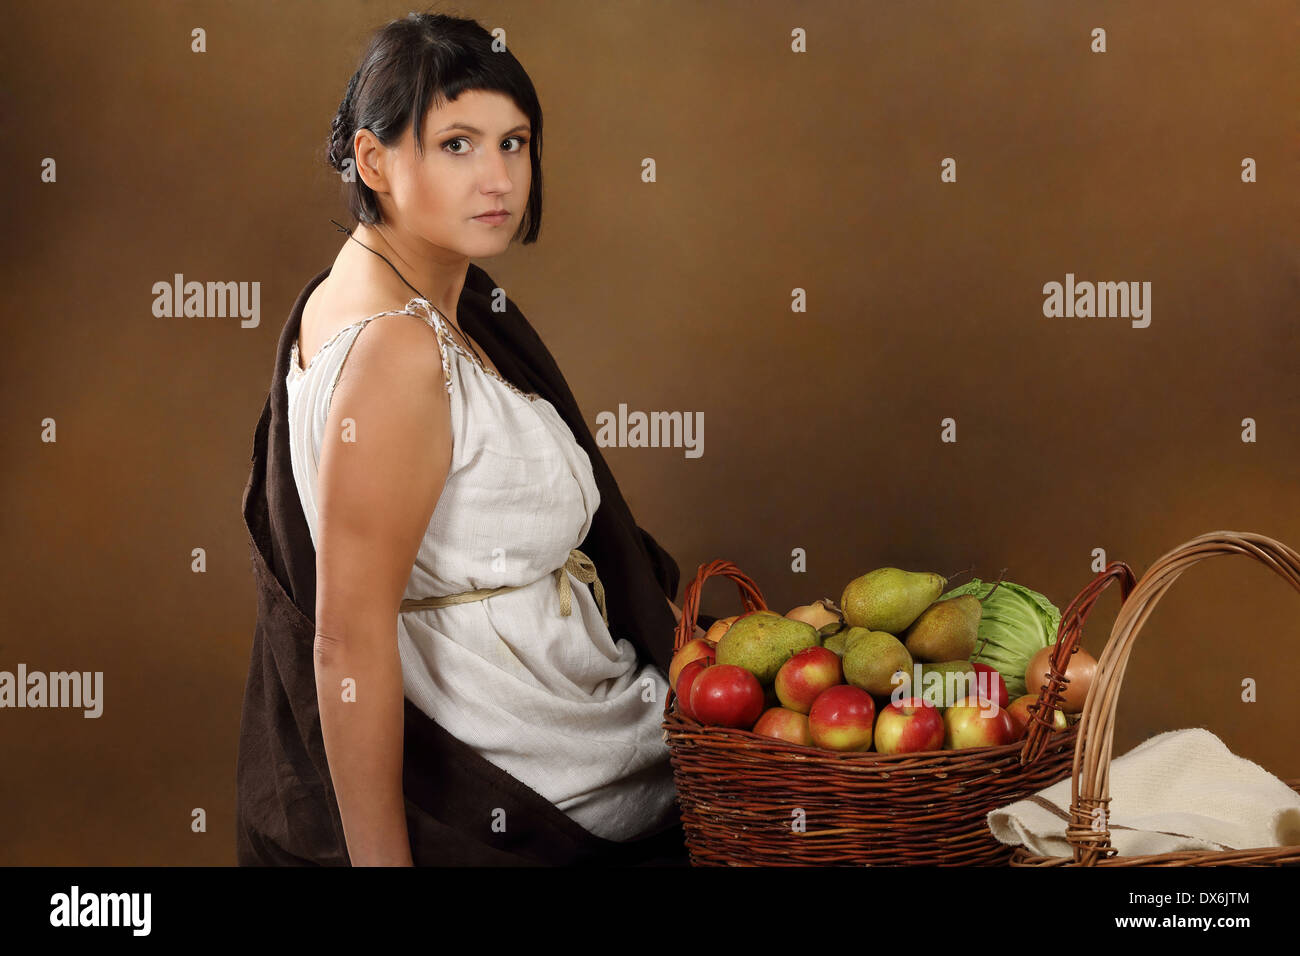 Young Romana with basket full of fruits and vegetables. Concept studio portrait on brown background. Stock Photo